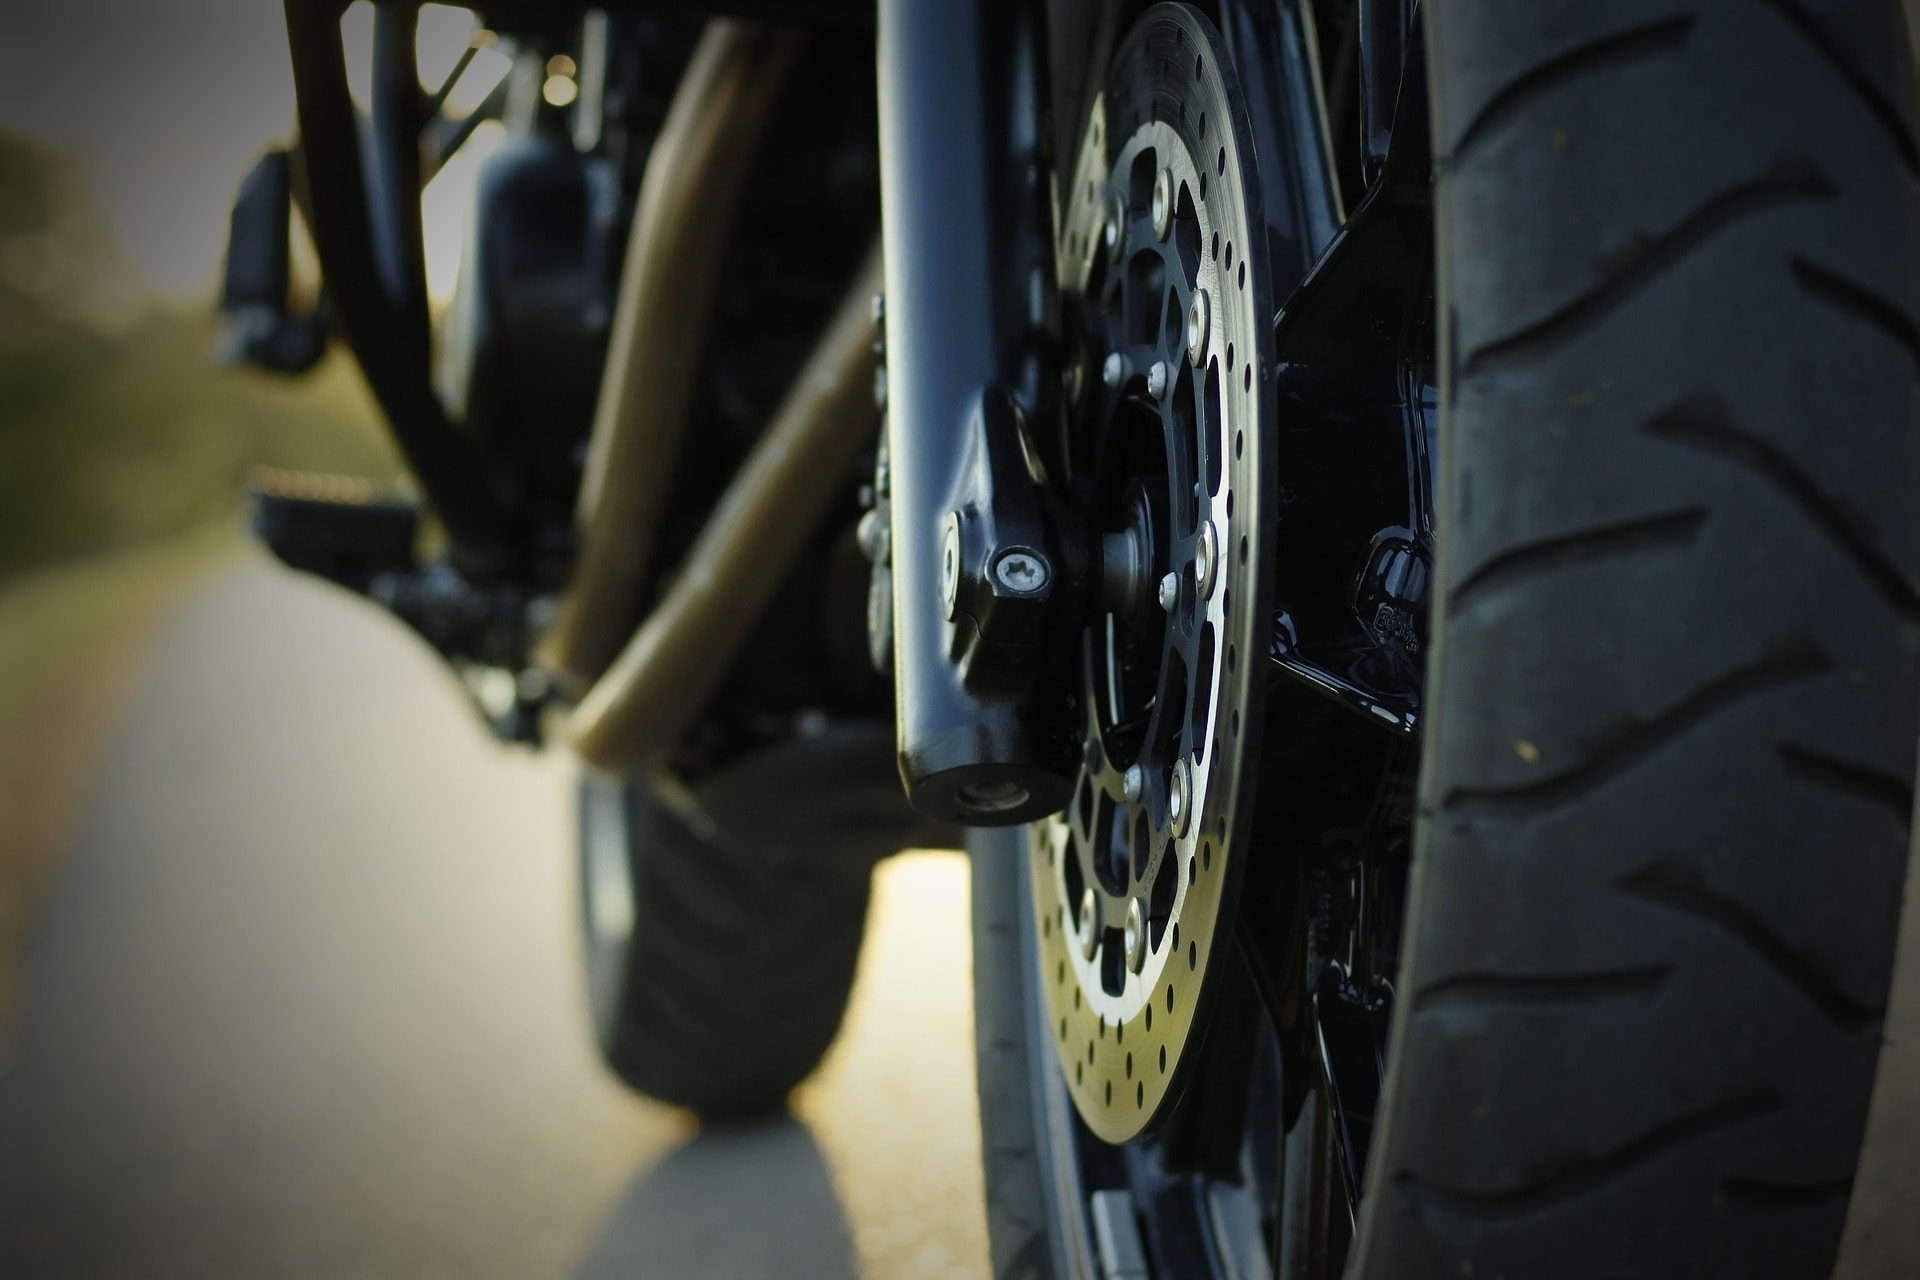 Tire view of a motorcycle. Who takes more braking distance?